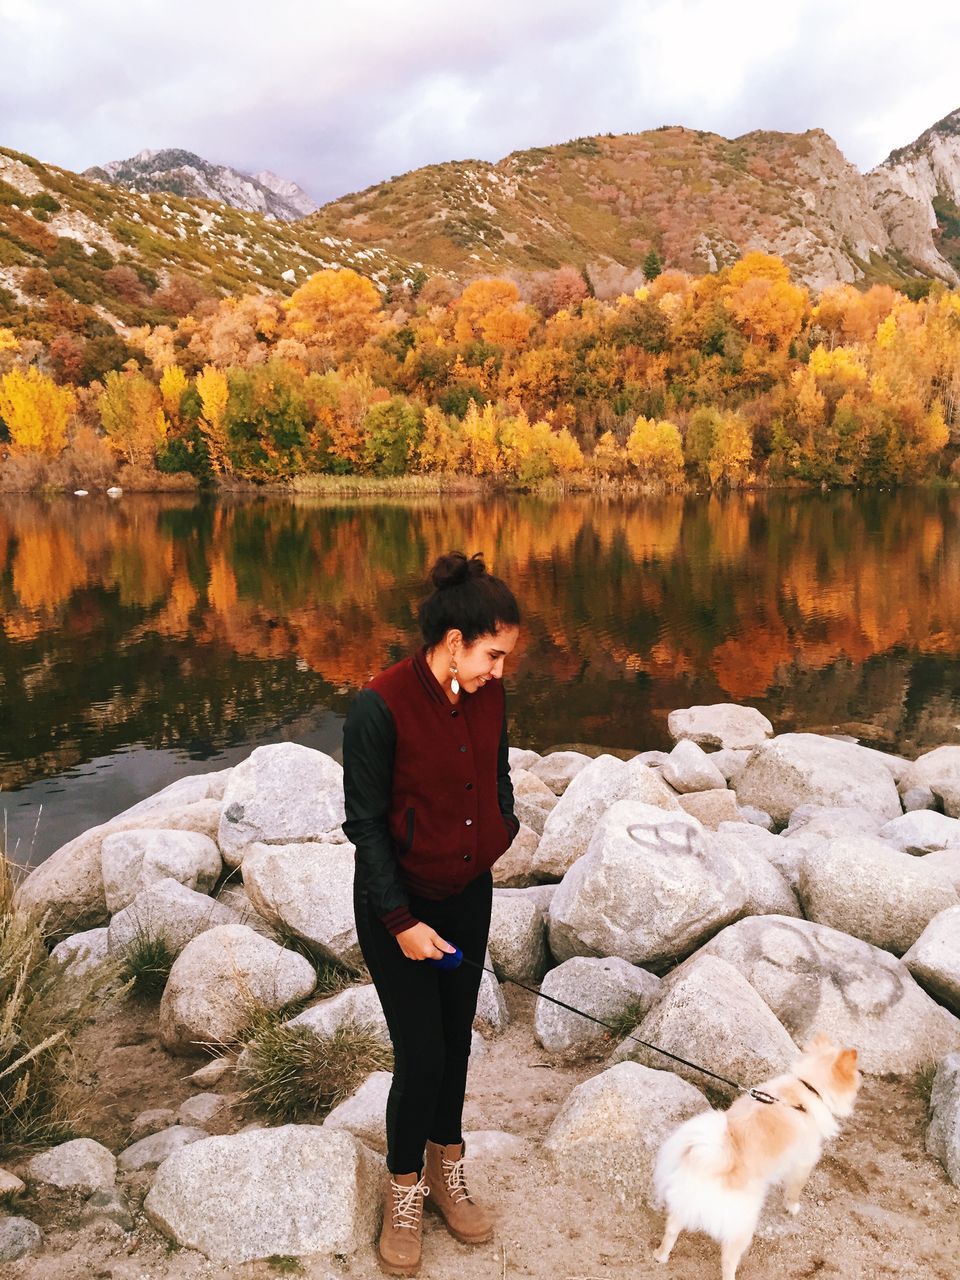 lifestyles, standing, leisure activity, rear view, full length, mountain, casual clothing, autumn, tranquility, sky, beauty in nature, rock - object, season, nature, scenics, tranquil scene, tree, water